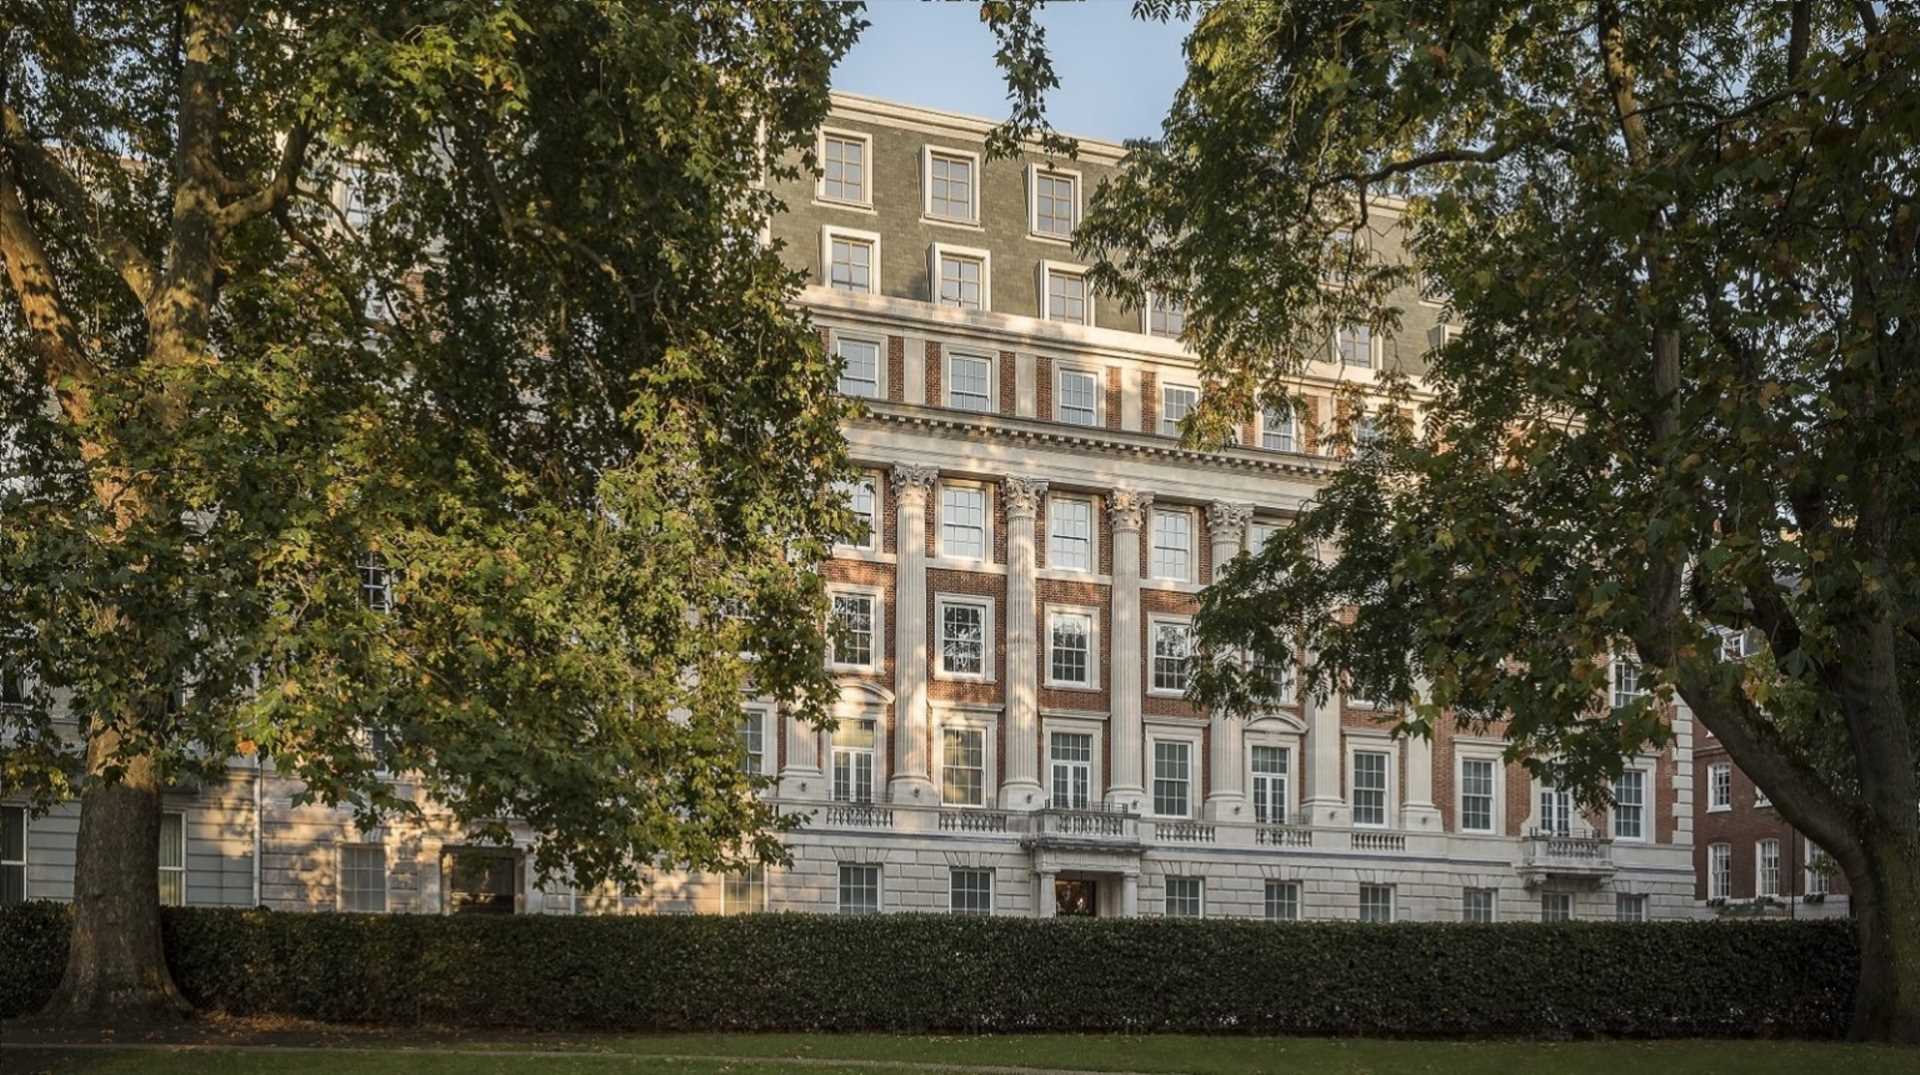 London`s luxury property boom continues as superprime deals hit £1bn in 2022 so far